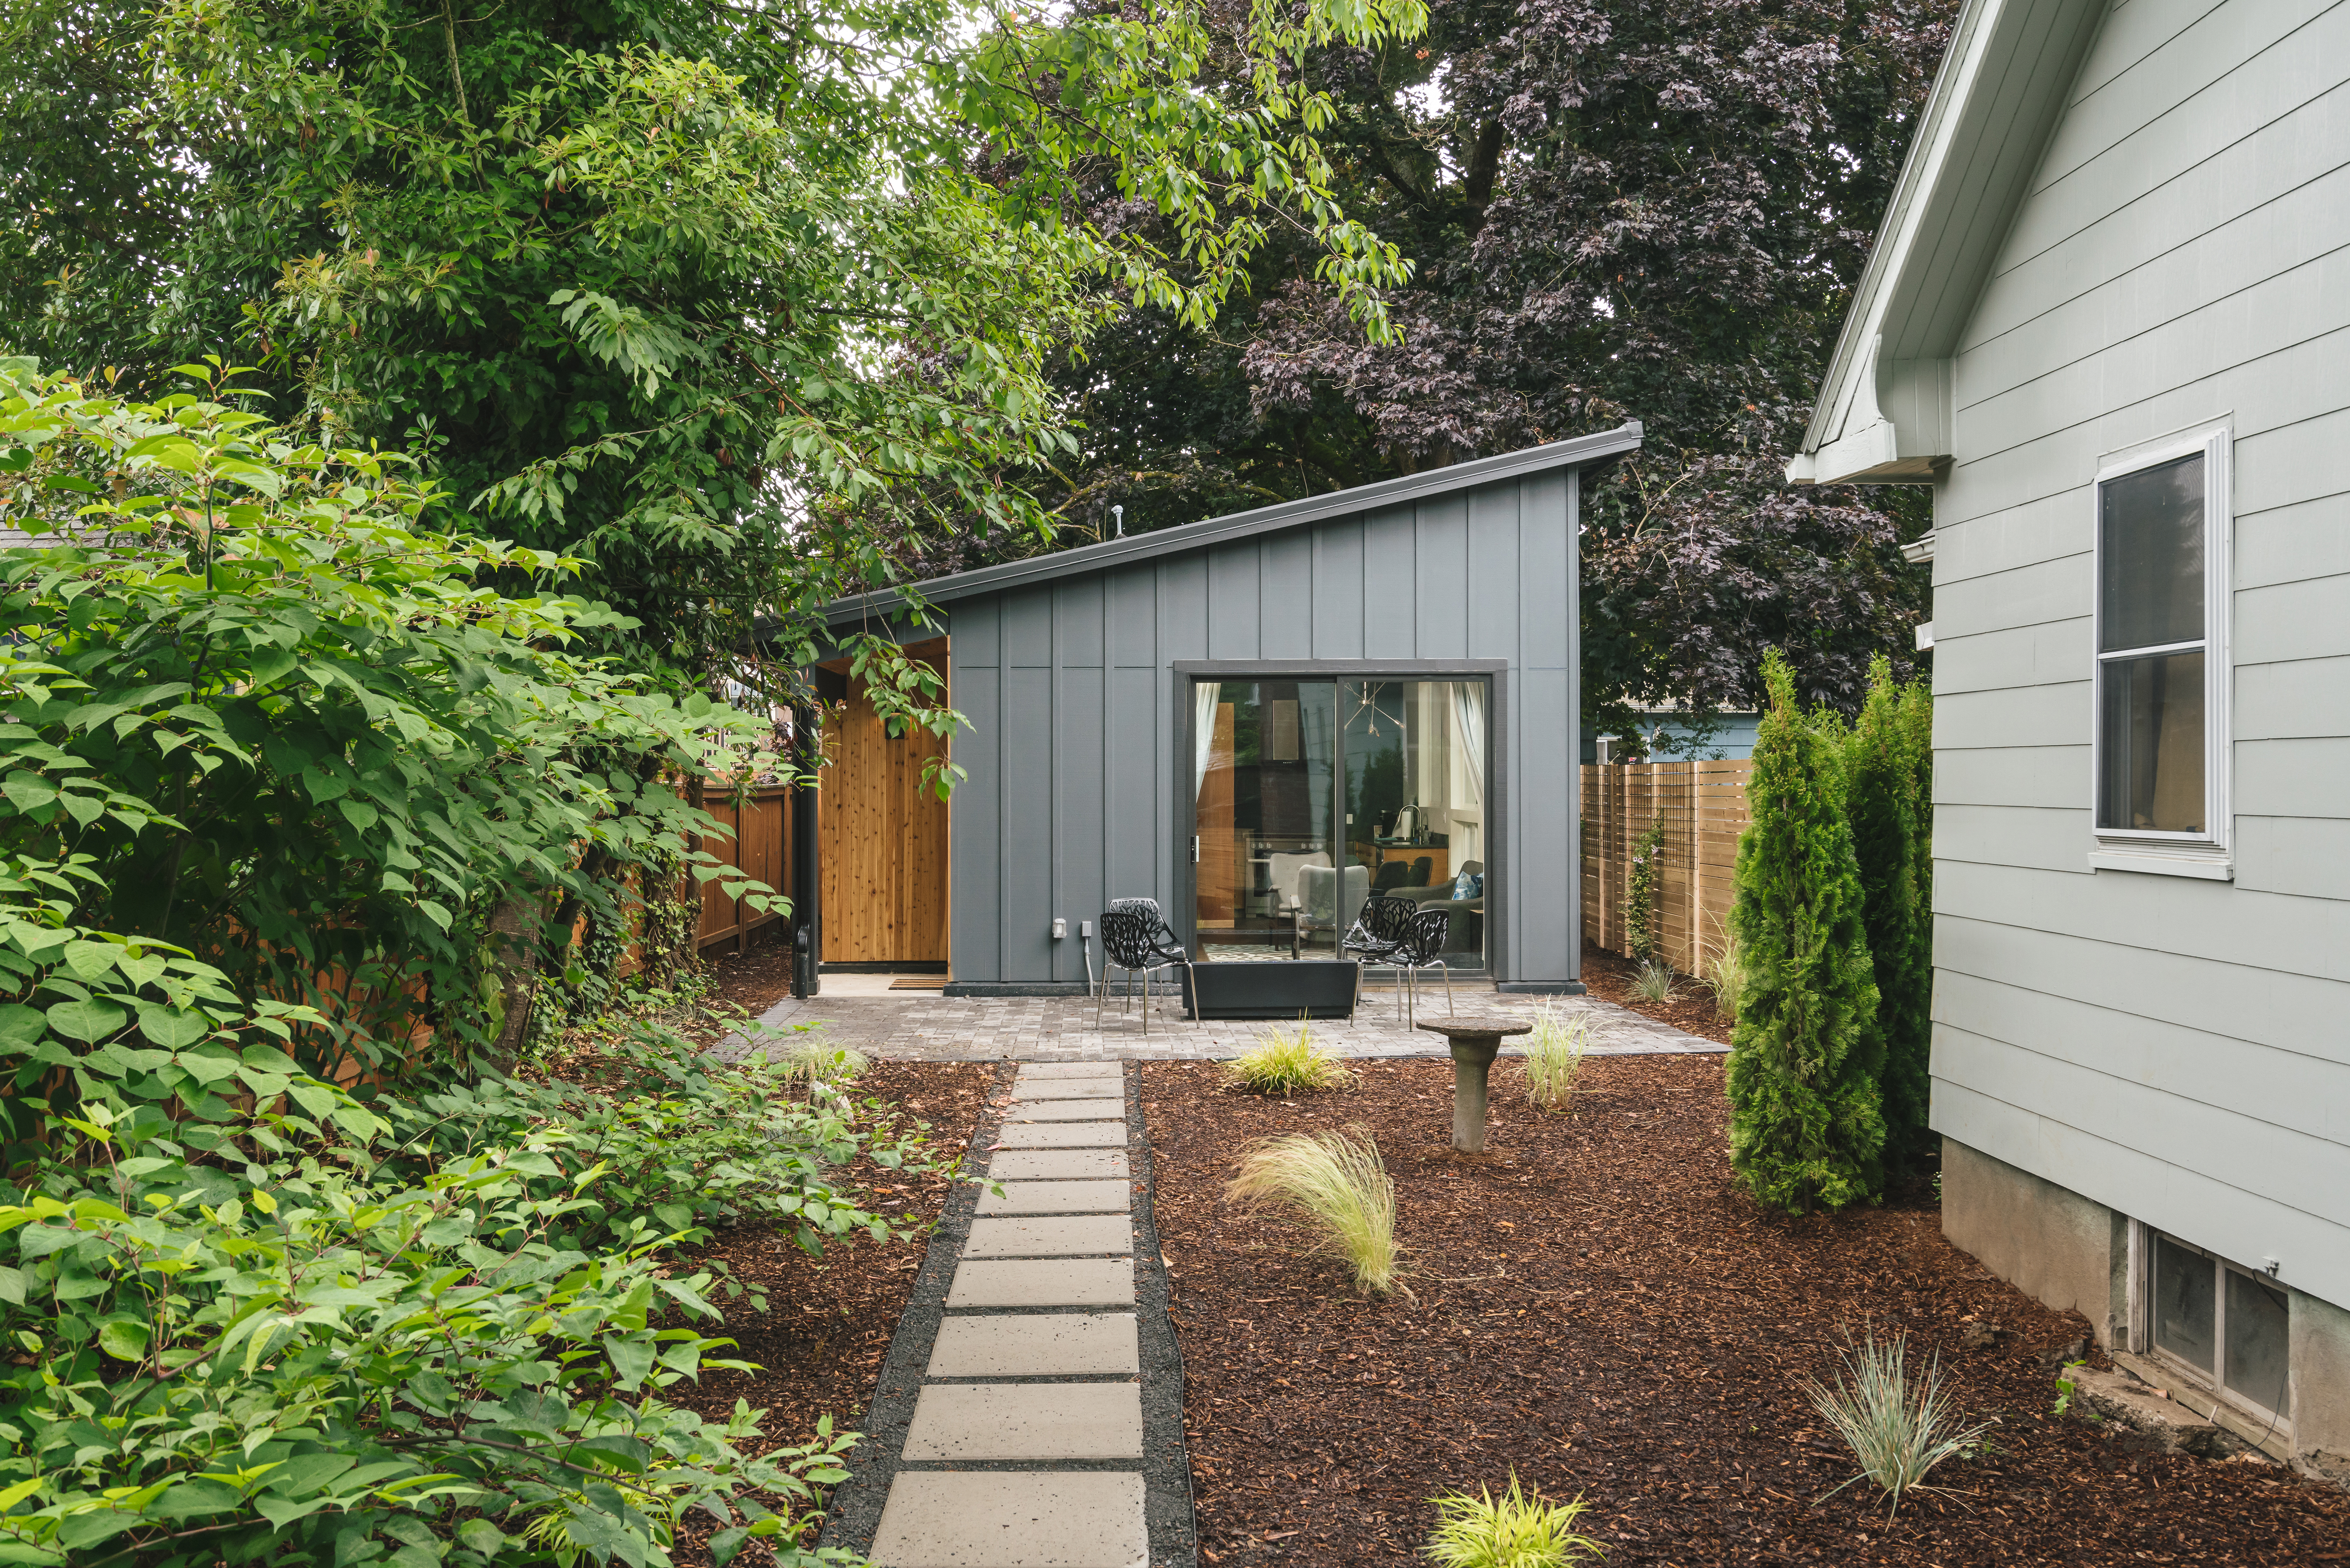 Put a spare home or two in your backyard: Oregon's ADU rules allow for more  income-producing rentals - oregonlive.com